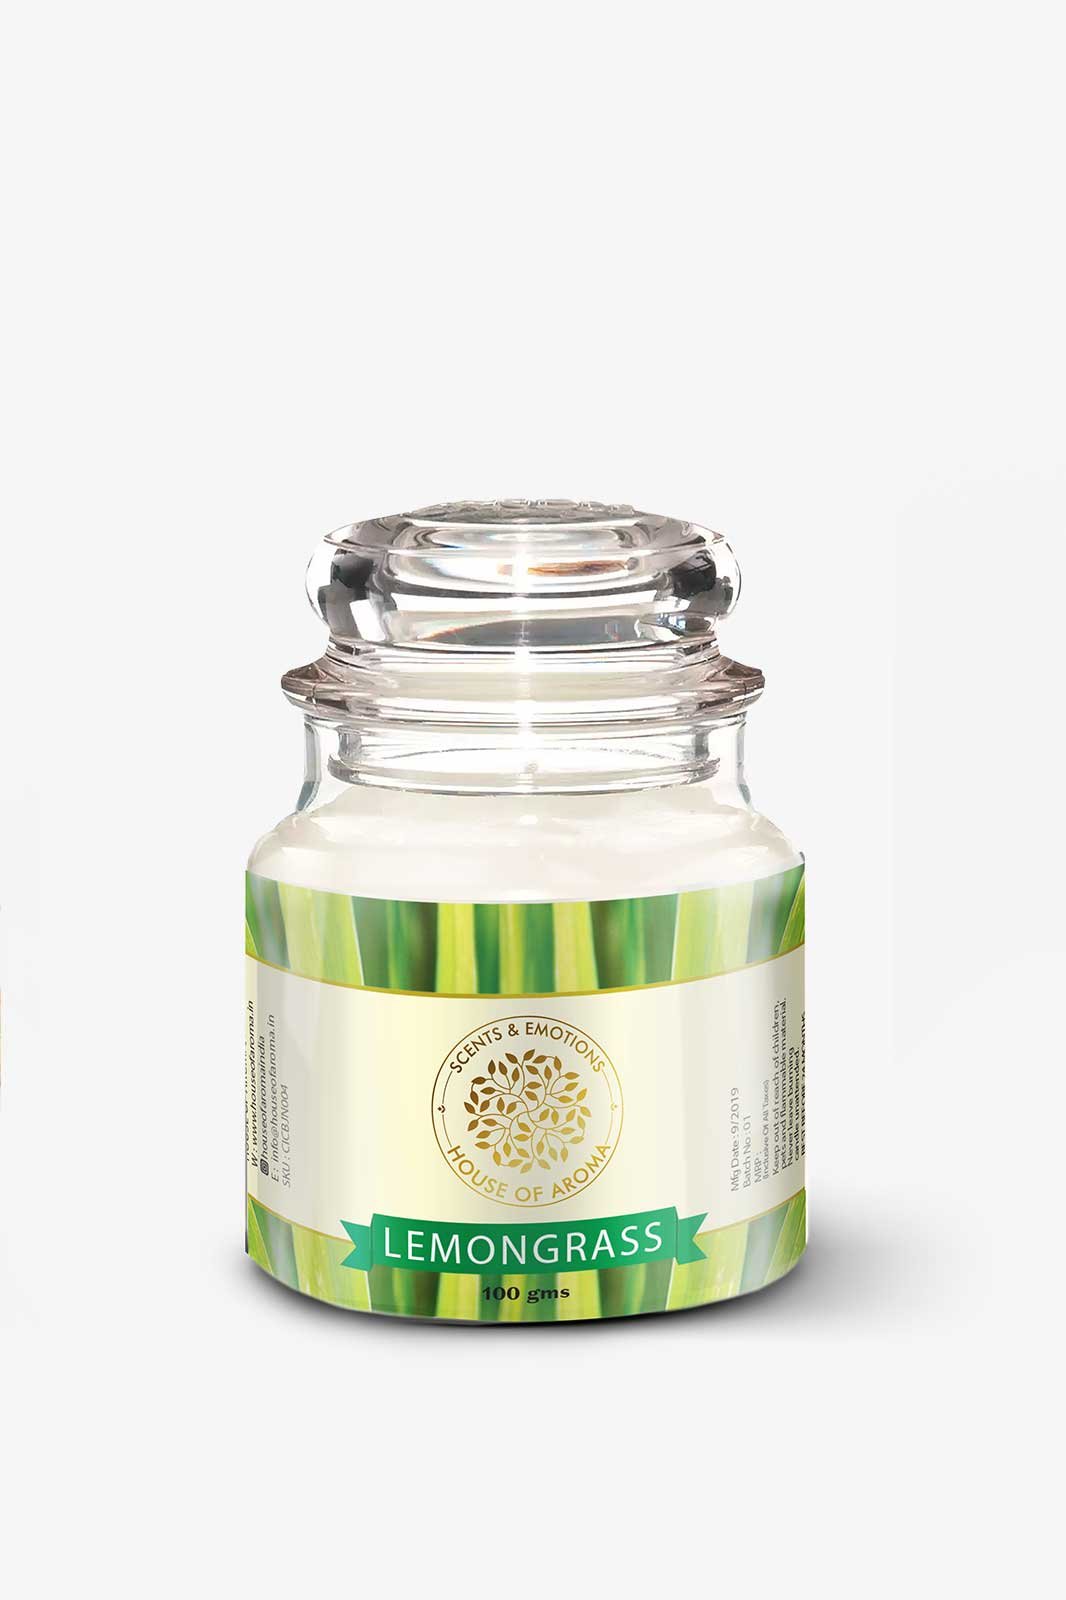 lemongrass bell jar candle, lemongrass wax candles, lemongrass tea candle, lemongrass soy candle, lemongrass pillar candle, lemongrass lavender candle, lemongrass ginger candle, lemongrass essential oil candle, lemongrass candles, lemongrass candle scent, lemongrass candle fragrance oil, House of Aroma, scented candles online, home decor scented candles, organic scented candles, online scented candles, home decor candle, buy scented candles online, room decor candles, best scented candles online, organic candles India, aroma candles online India, organic scents for candles, organic soy candles, natural scented beeswax candles, benefits scented candles, aroma candles buy online, scented candles for home decor, best scents of candles, organic natural scented candles, home decor aroma candles, scented candles order online, organic soy candle wax, best home scented candles, best organic scented candles, organic scented oils, best fragrance scented candles, organic aroma for candles, organic soy for candles, aroma scented candles, scented candle brand, aroma diffuser candle, essential oil for scented candles, aroma candles gift set, best aroma candles in India